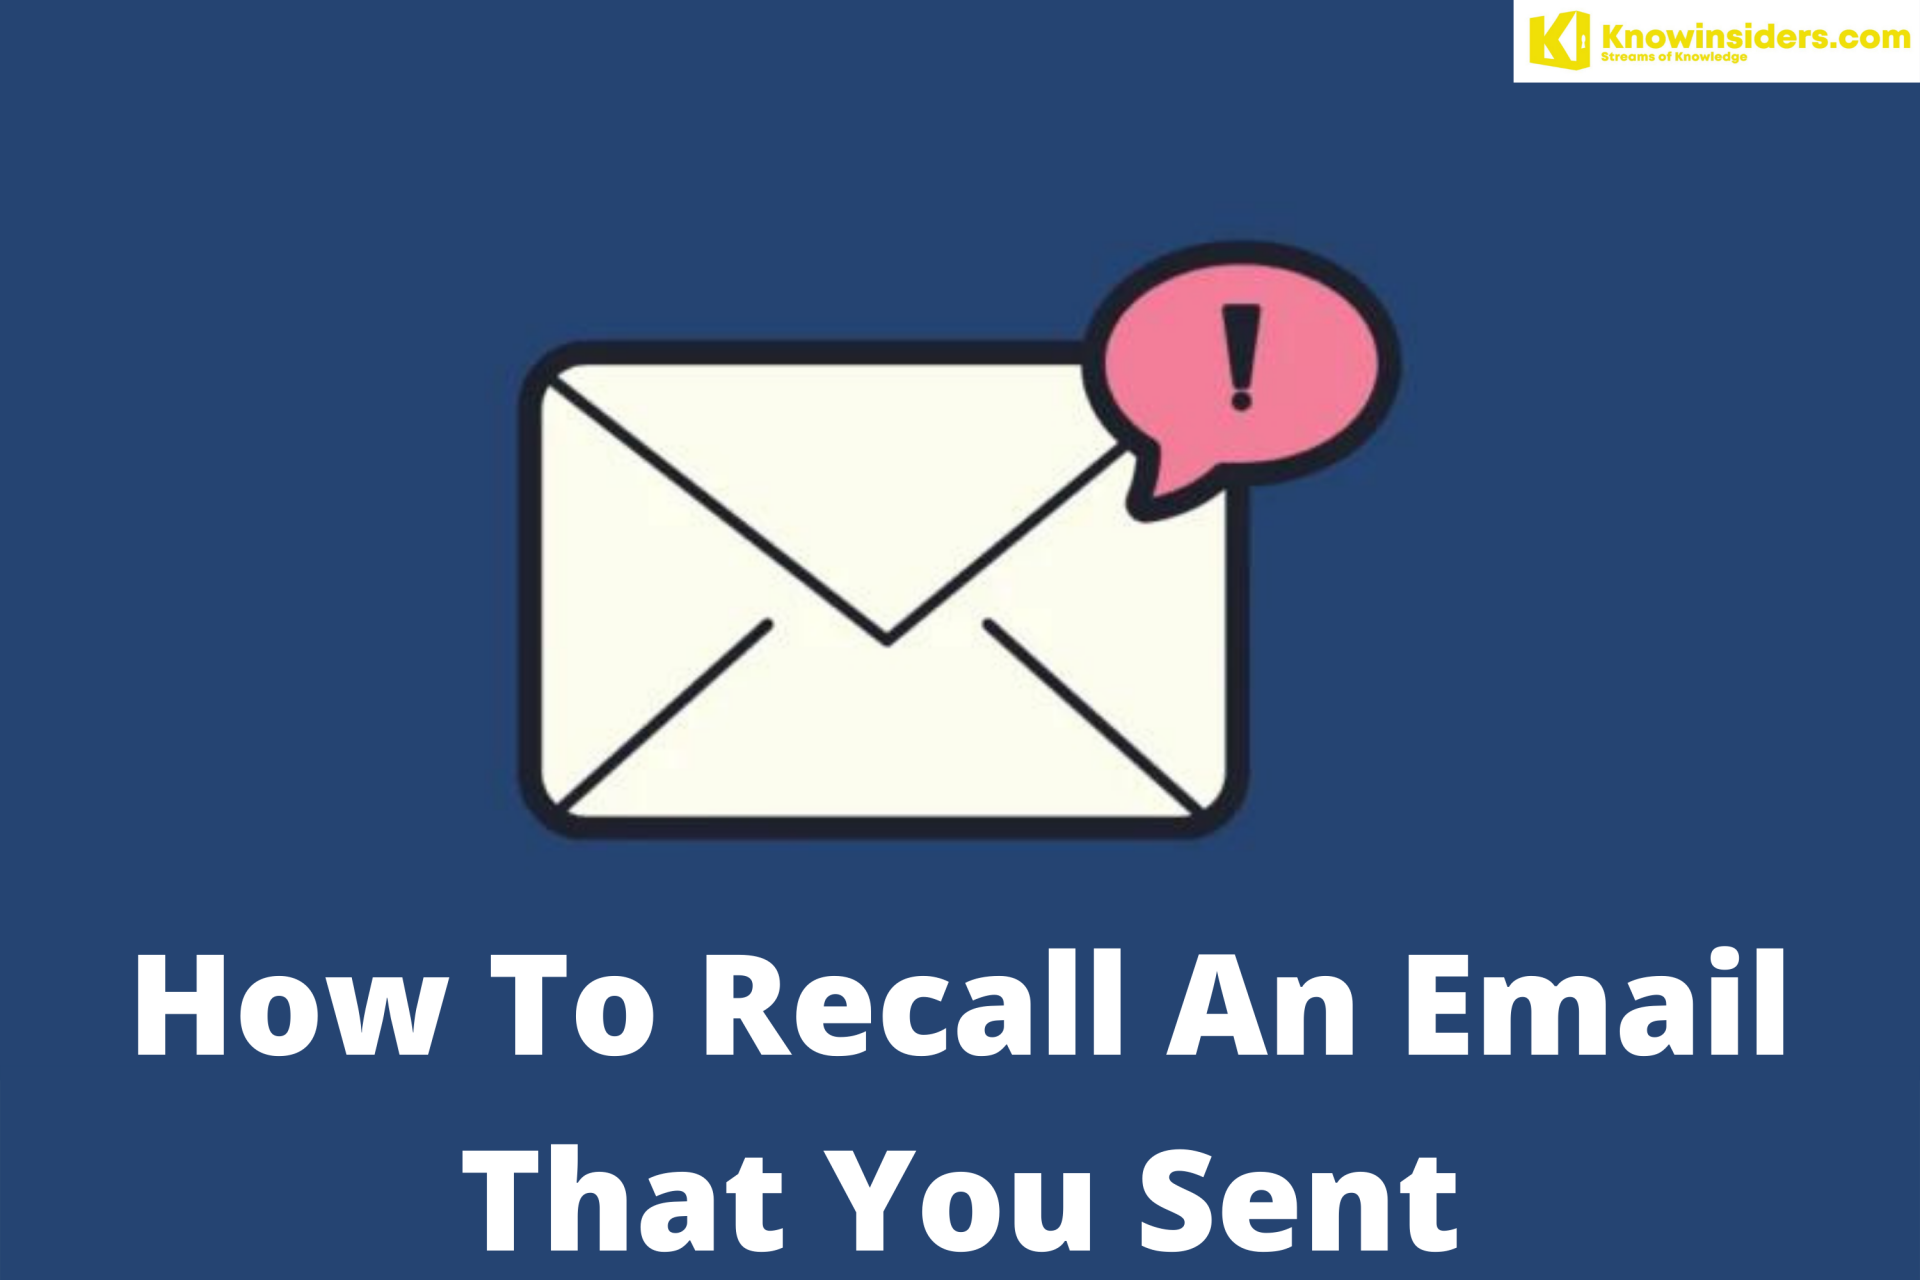 How To Recall An Email That You Sent